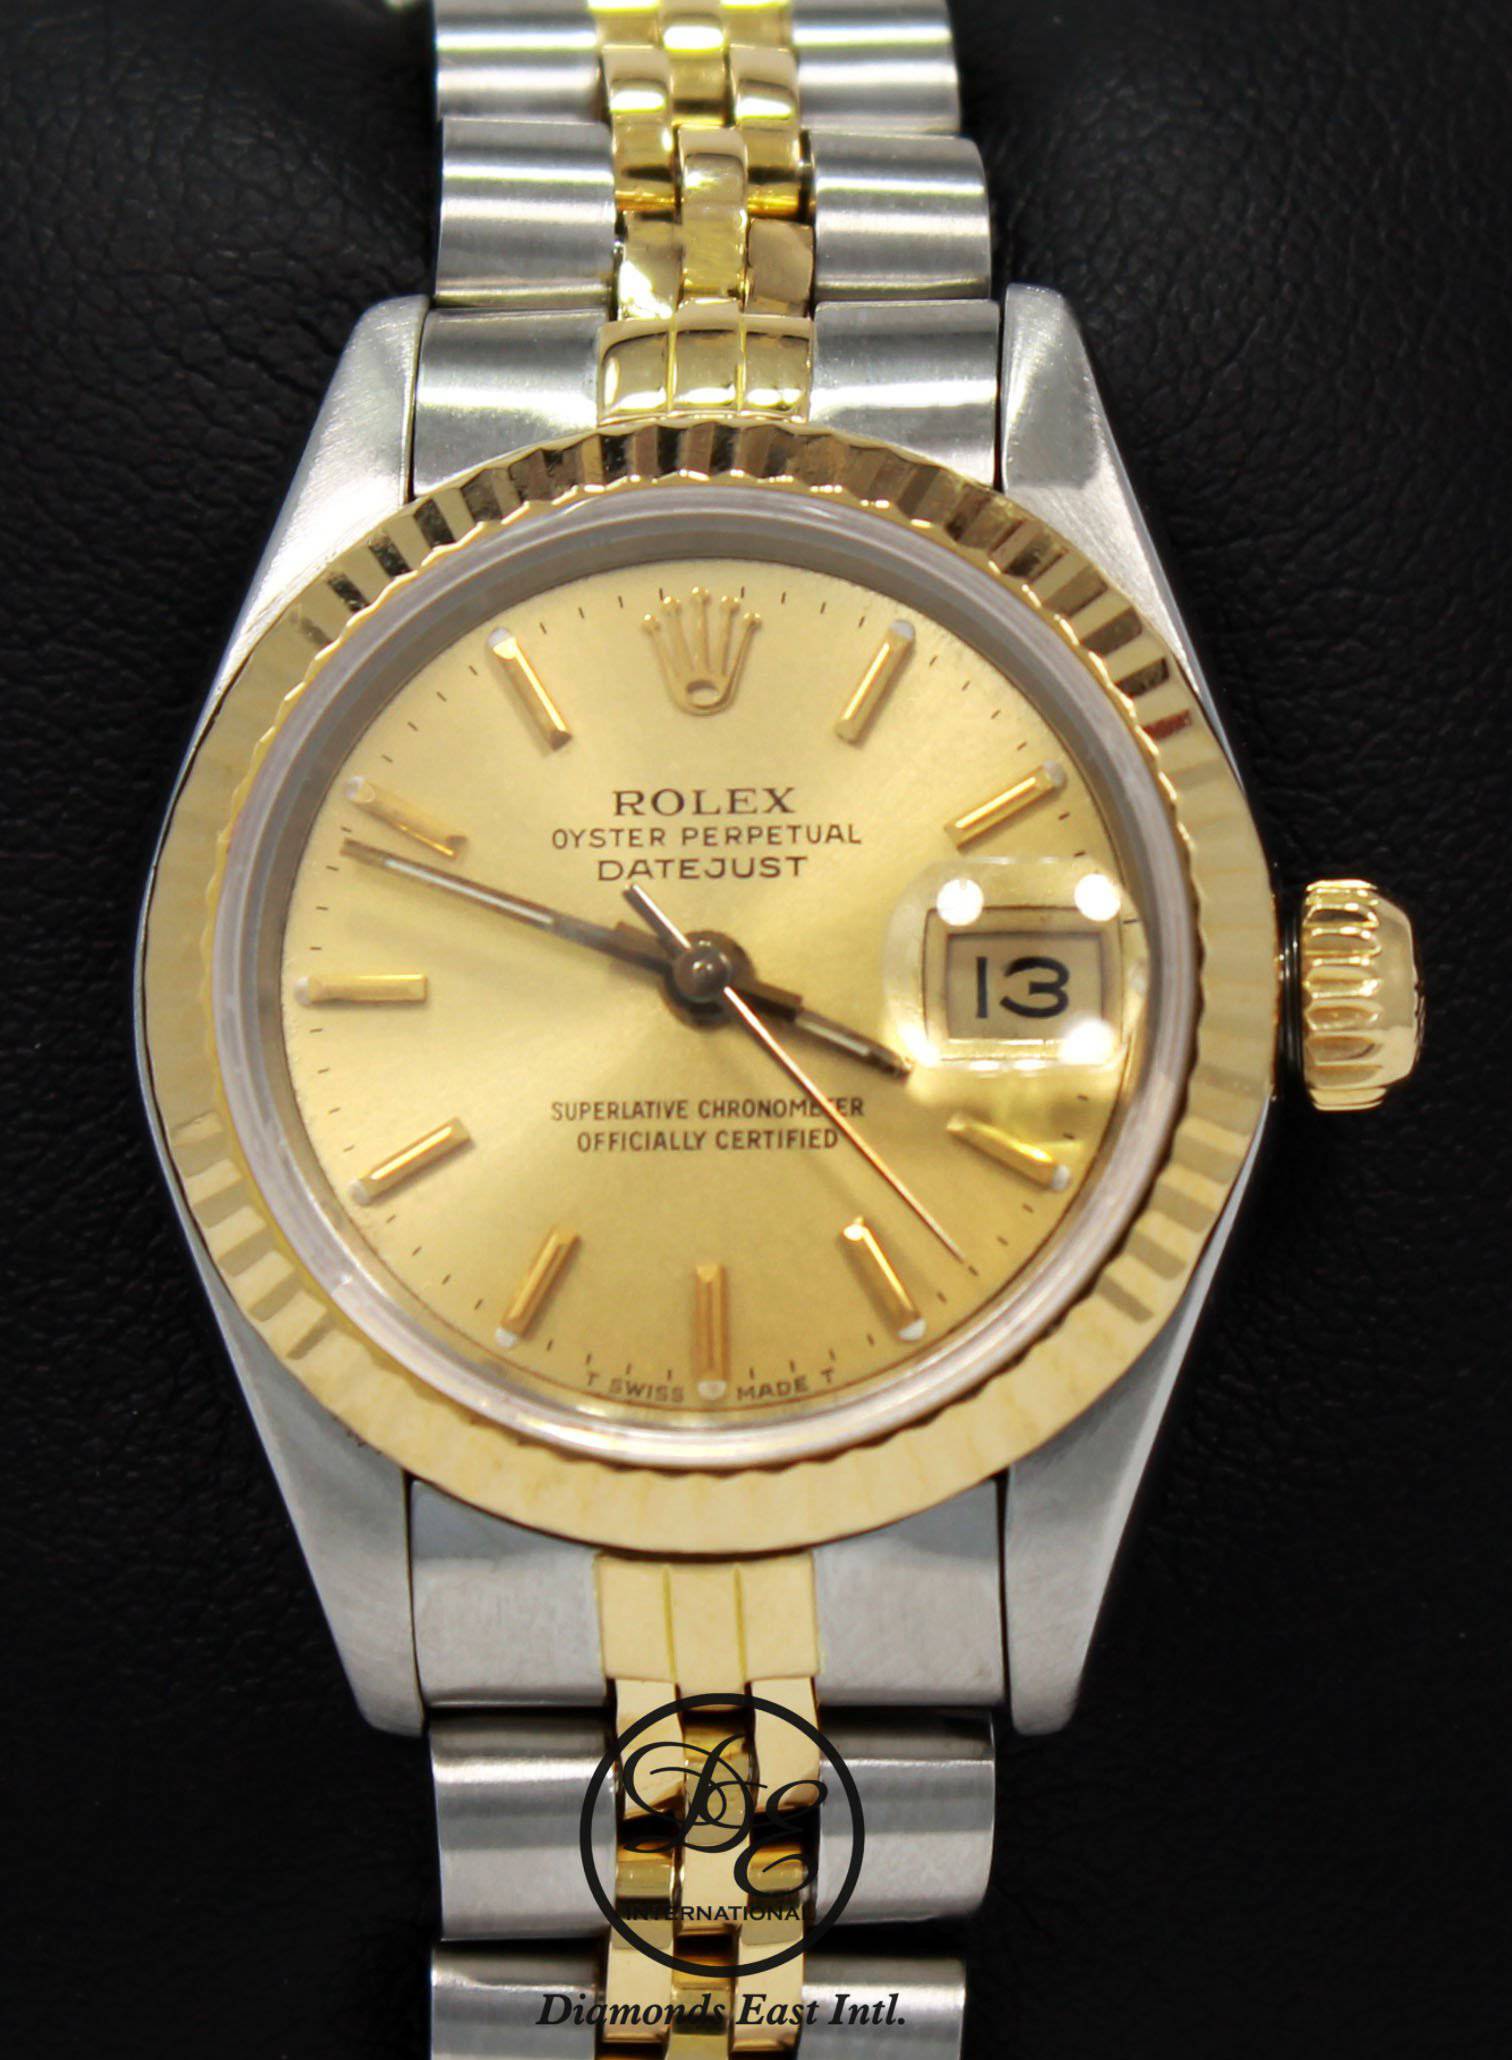 Rolex Datejust 26mm Yellow Gold and Stainless Steel Bracelet